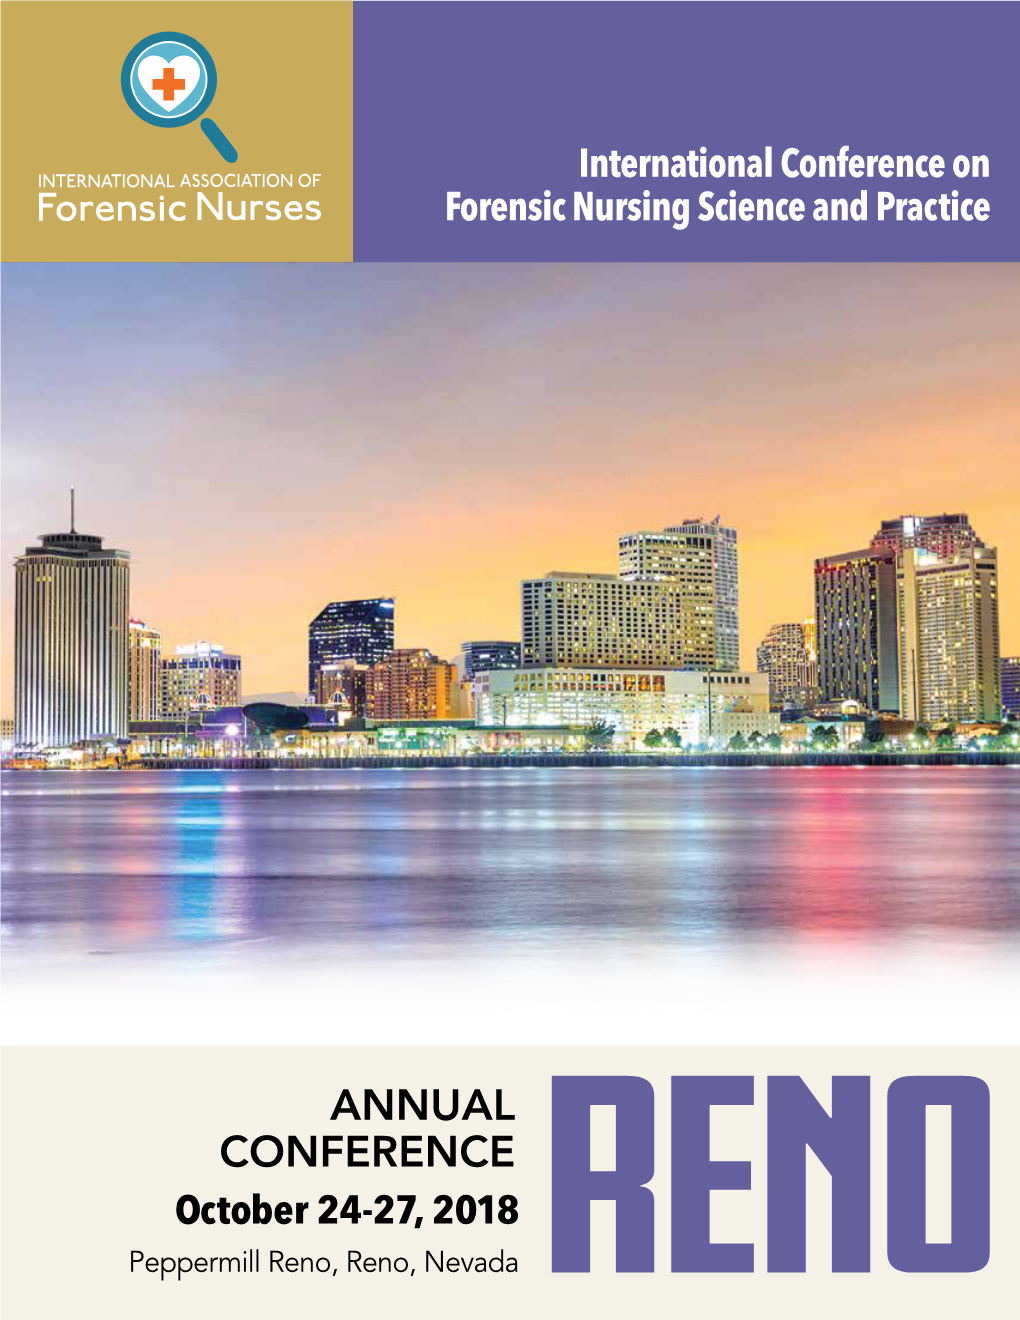 ANNUAL CONFERENCE October 24-27, 2018 Peppermill Reno, Reno, Nevada FORENSIC NURSING RESEARCH the Key to Building Evidence-Based Practice